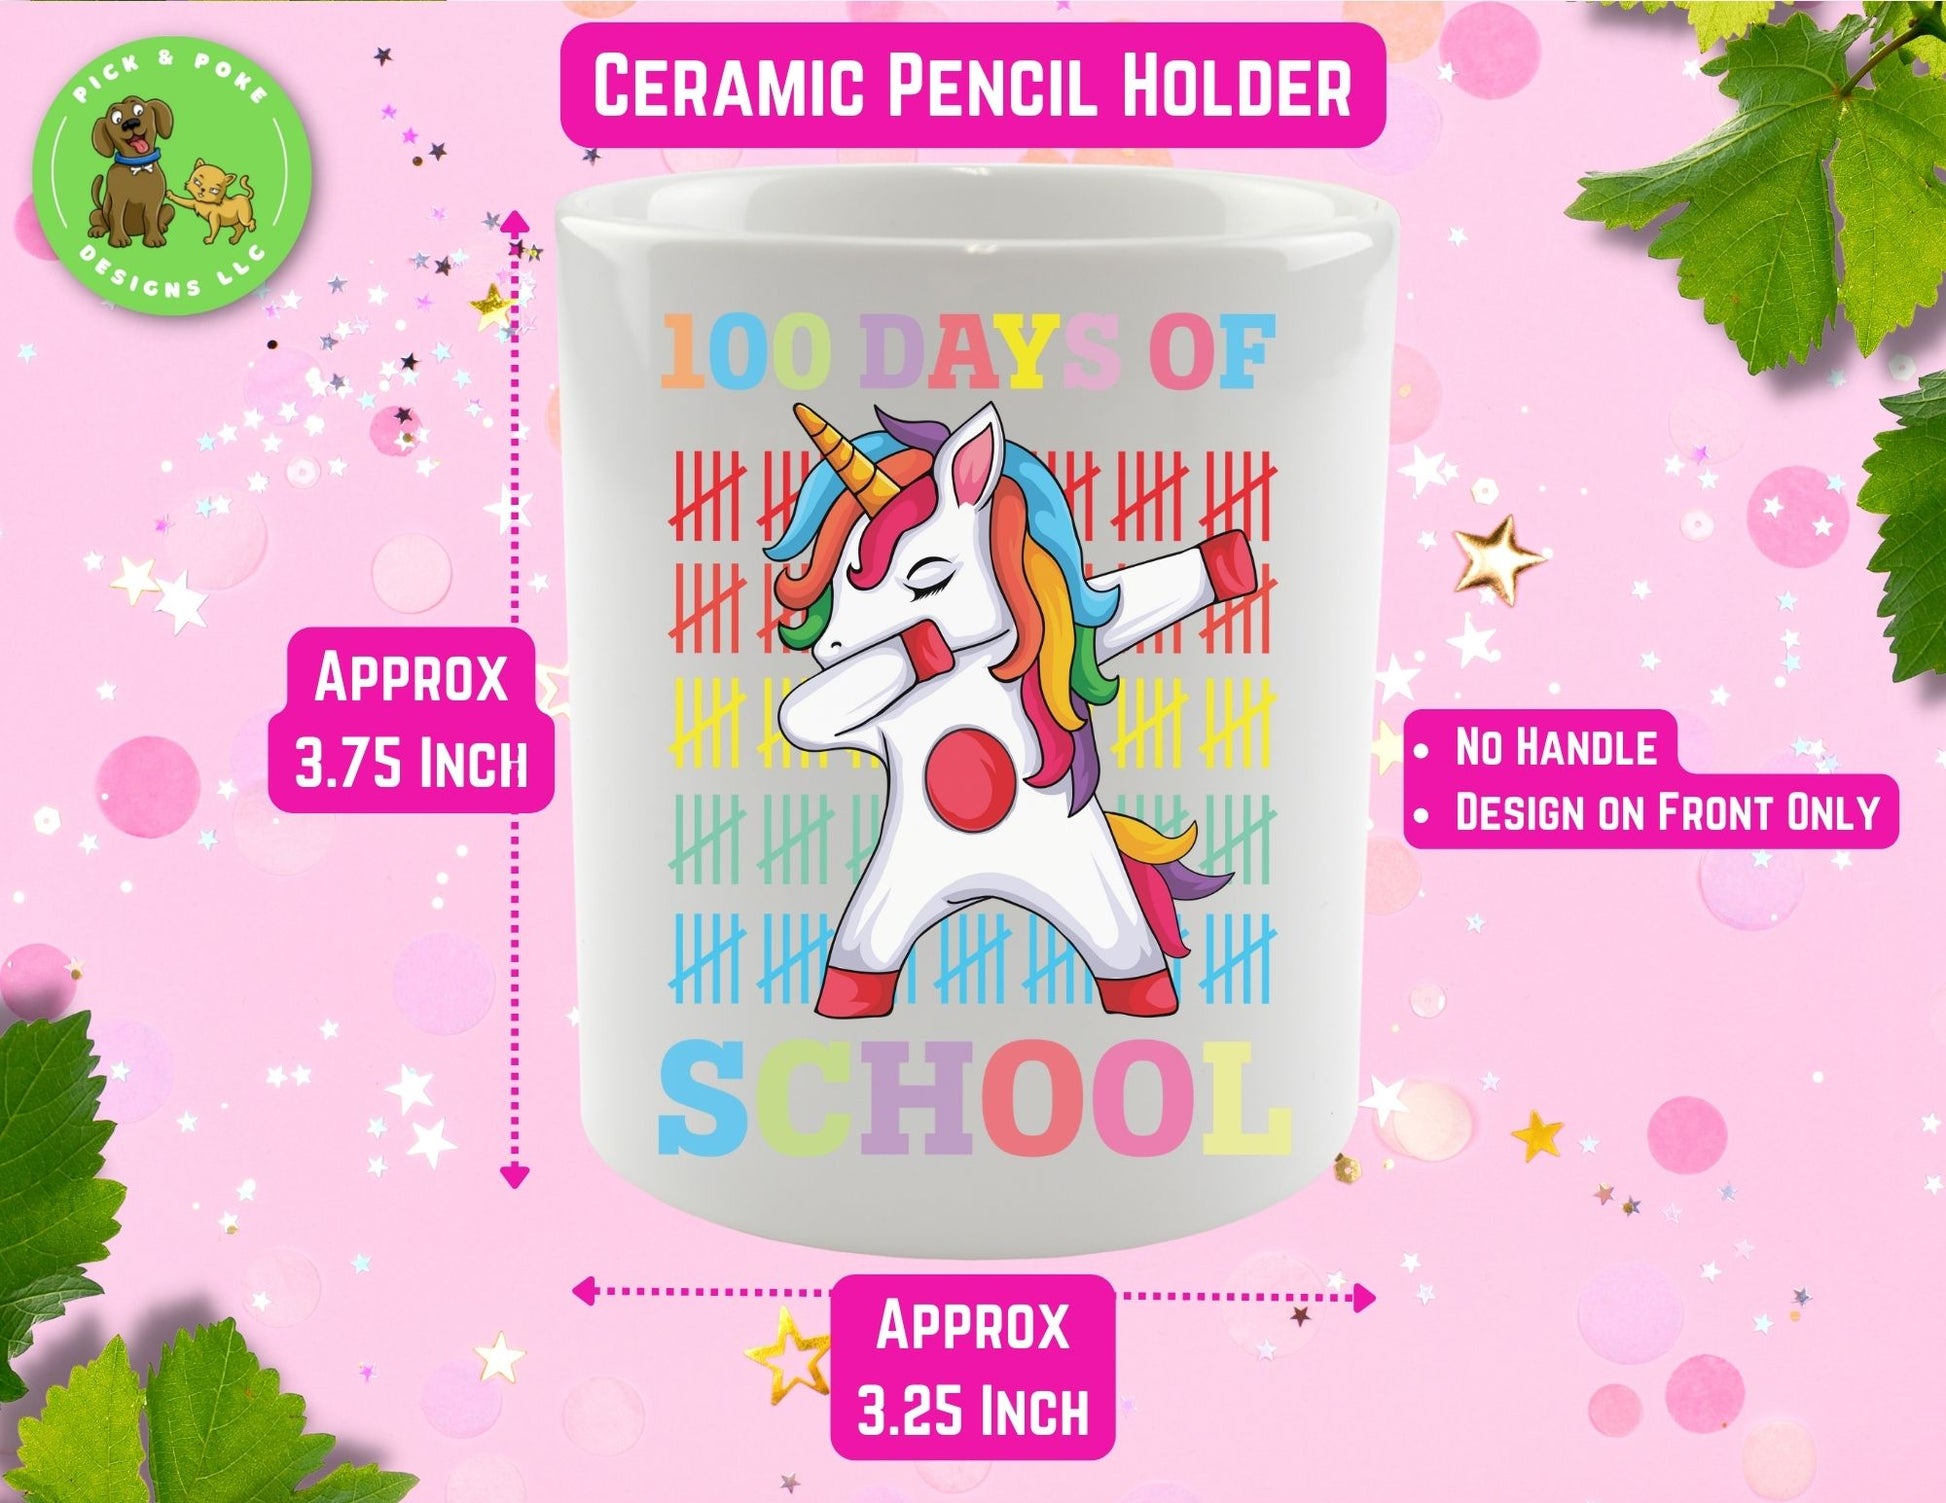 100 days of school ceramic pencil holder is 3.75 inches tall and has a circumference of 10.5 inches. 